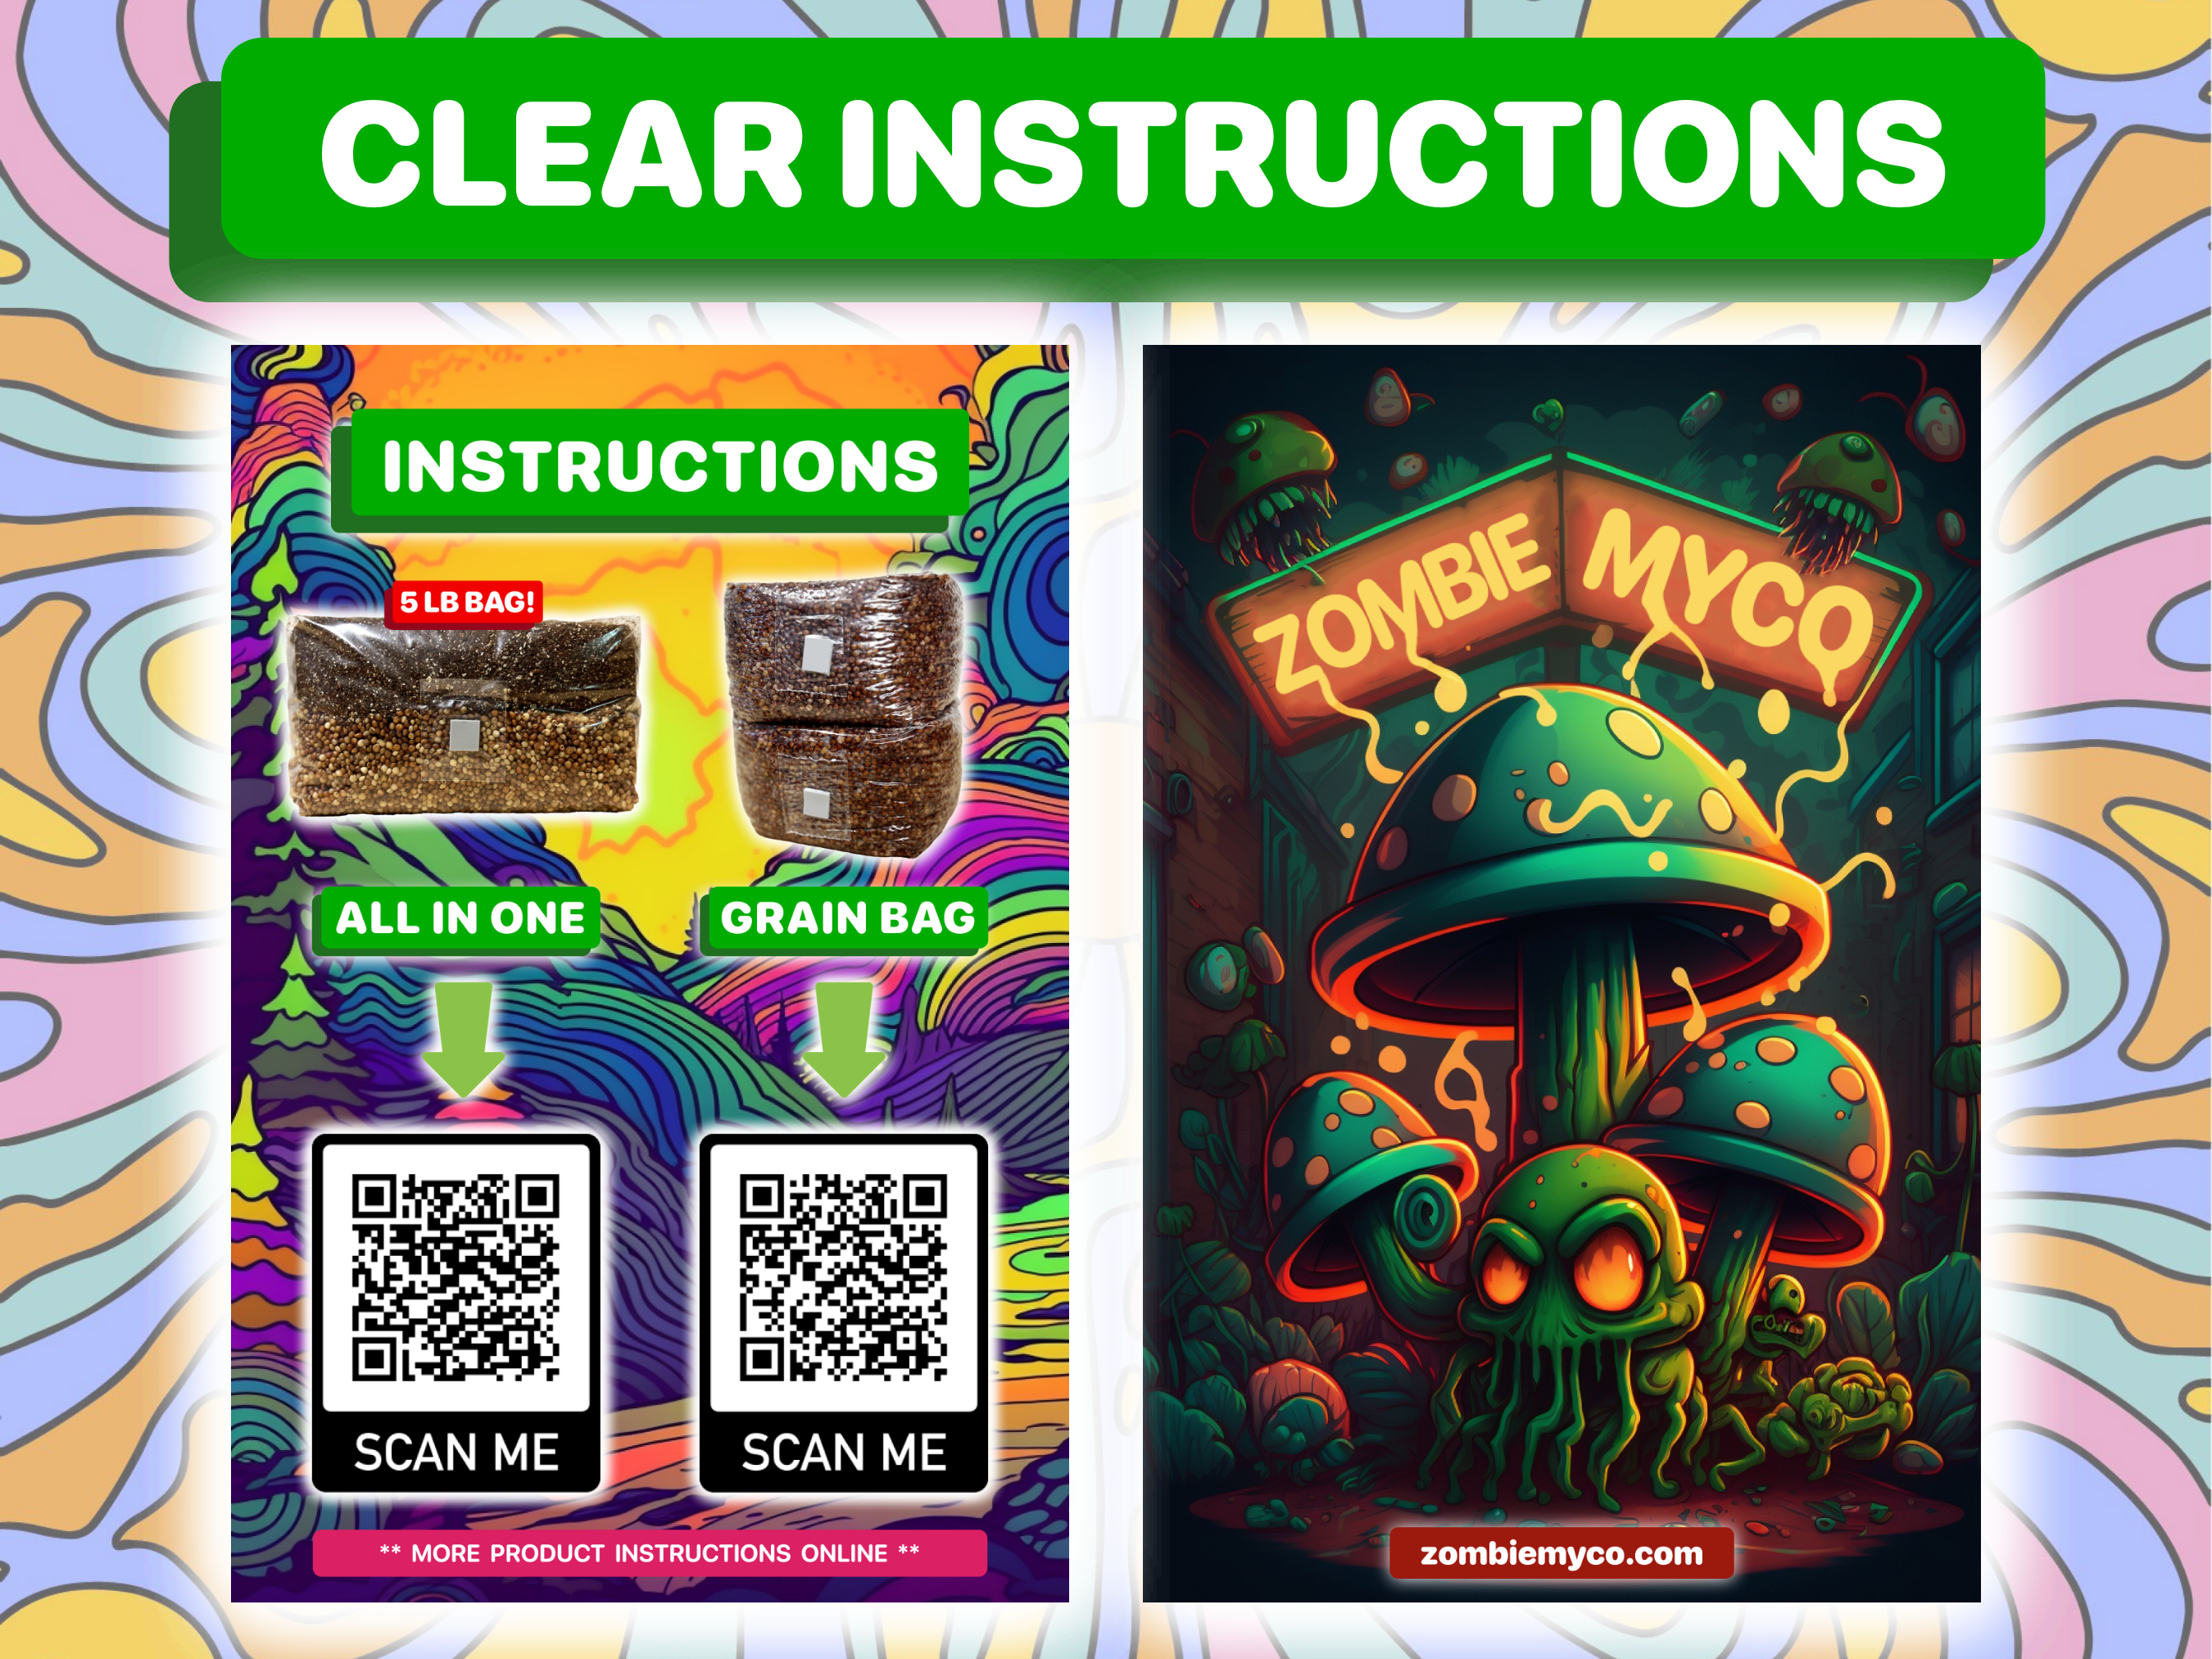 clear instructions on how to purchase, with qr code you can scan